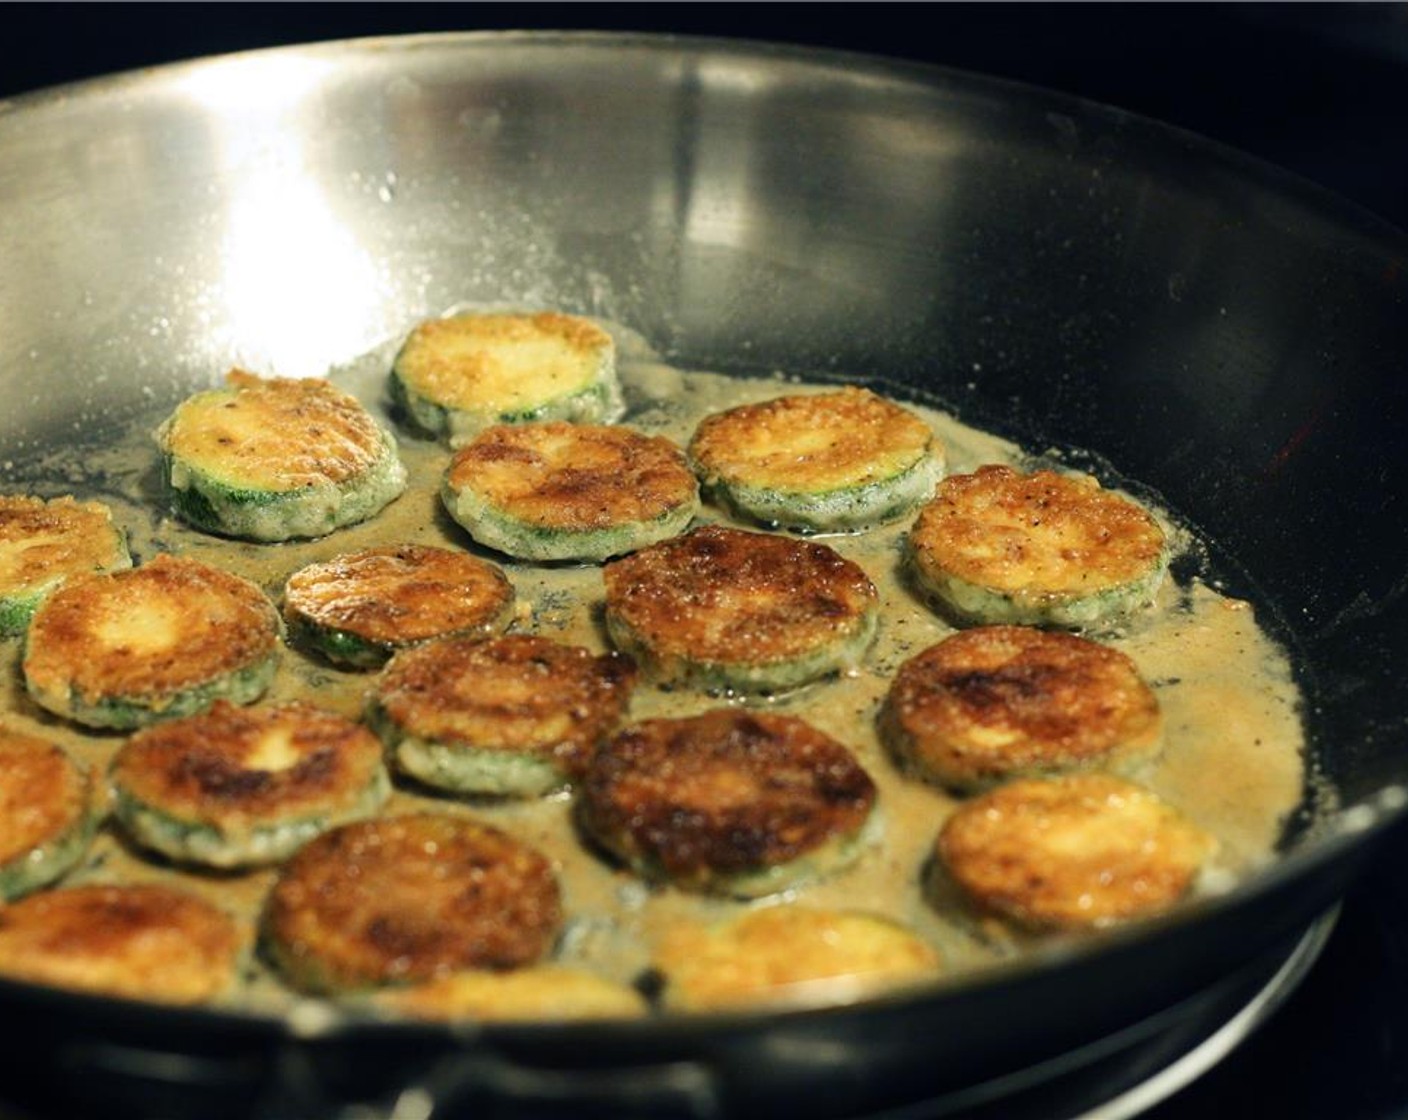 step 6 Gently flip each medallion with a fork and cook until both sides are golden brown. Remove from pan to a plate lined with napkins or paper towels. Continue until all zucchini is cooked, replenishing the oil in the frying pan as needed.